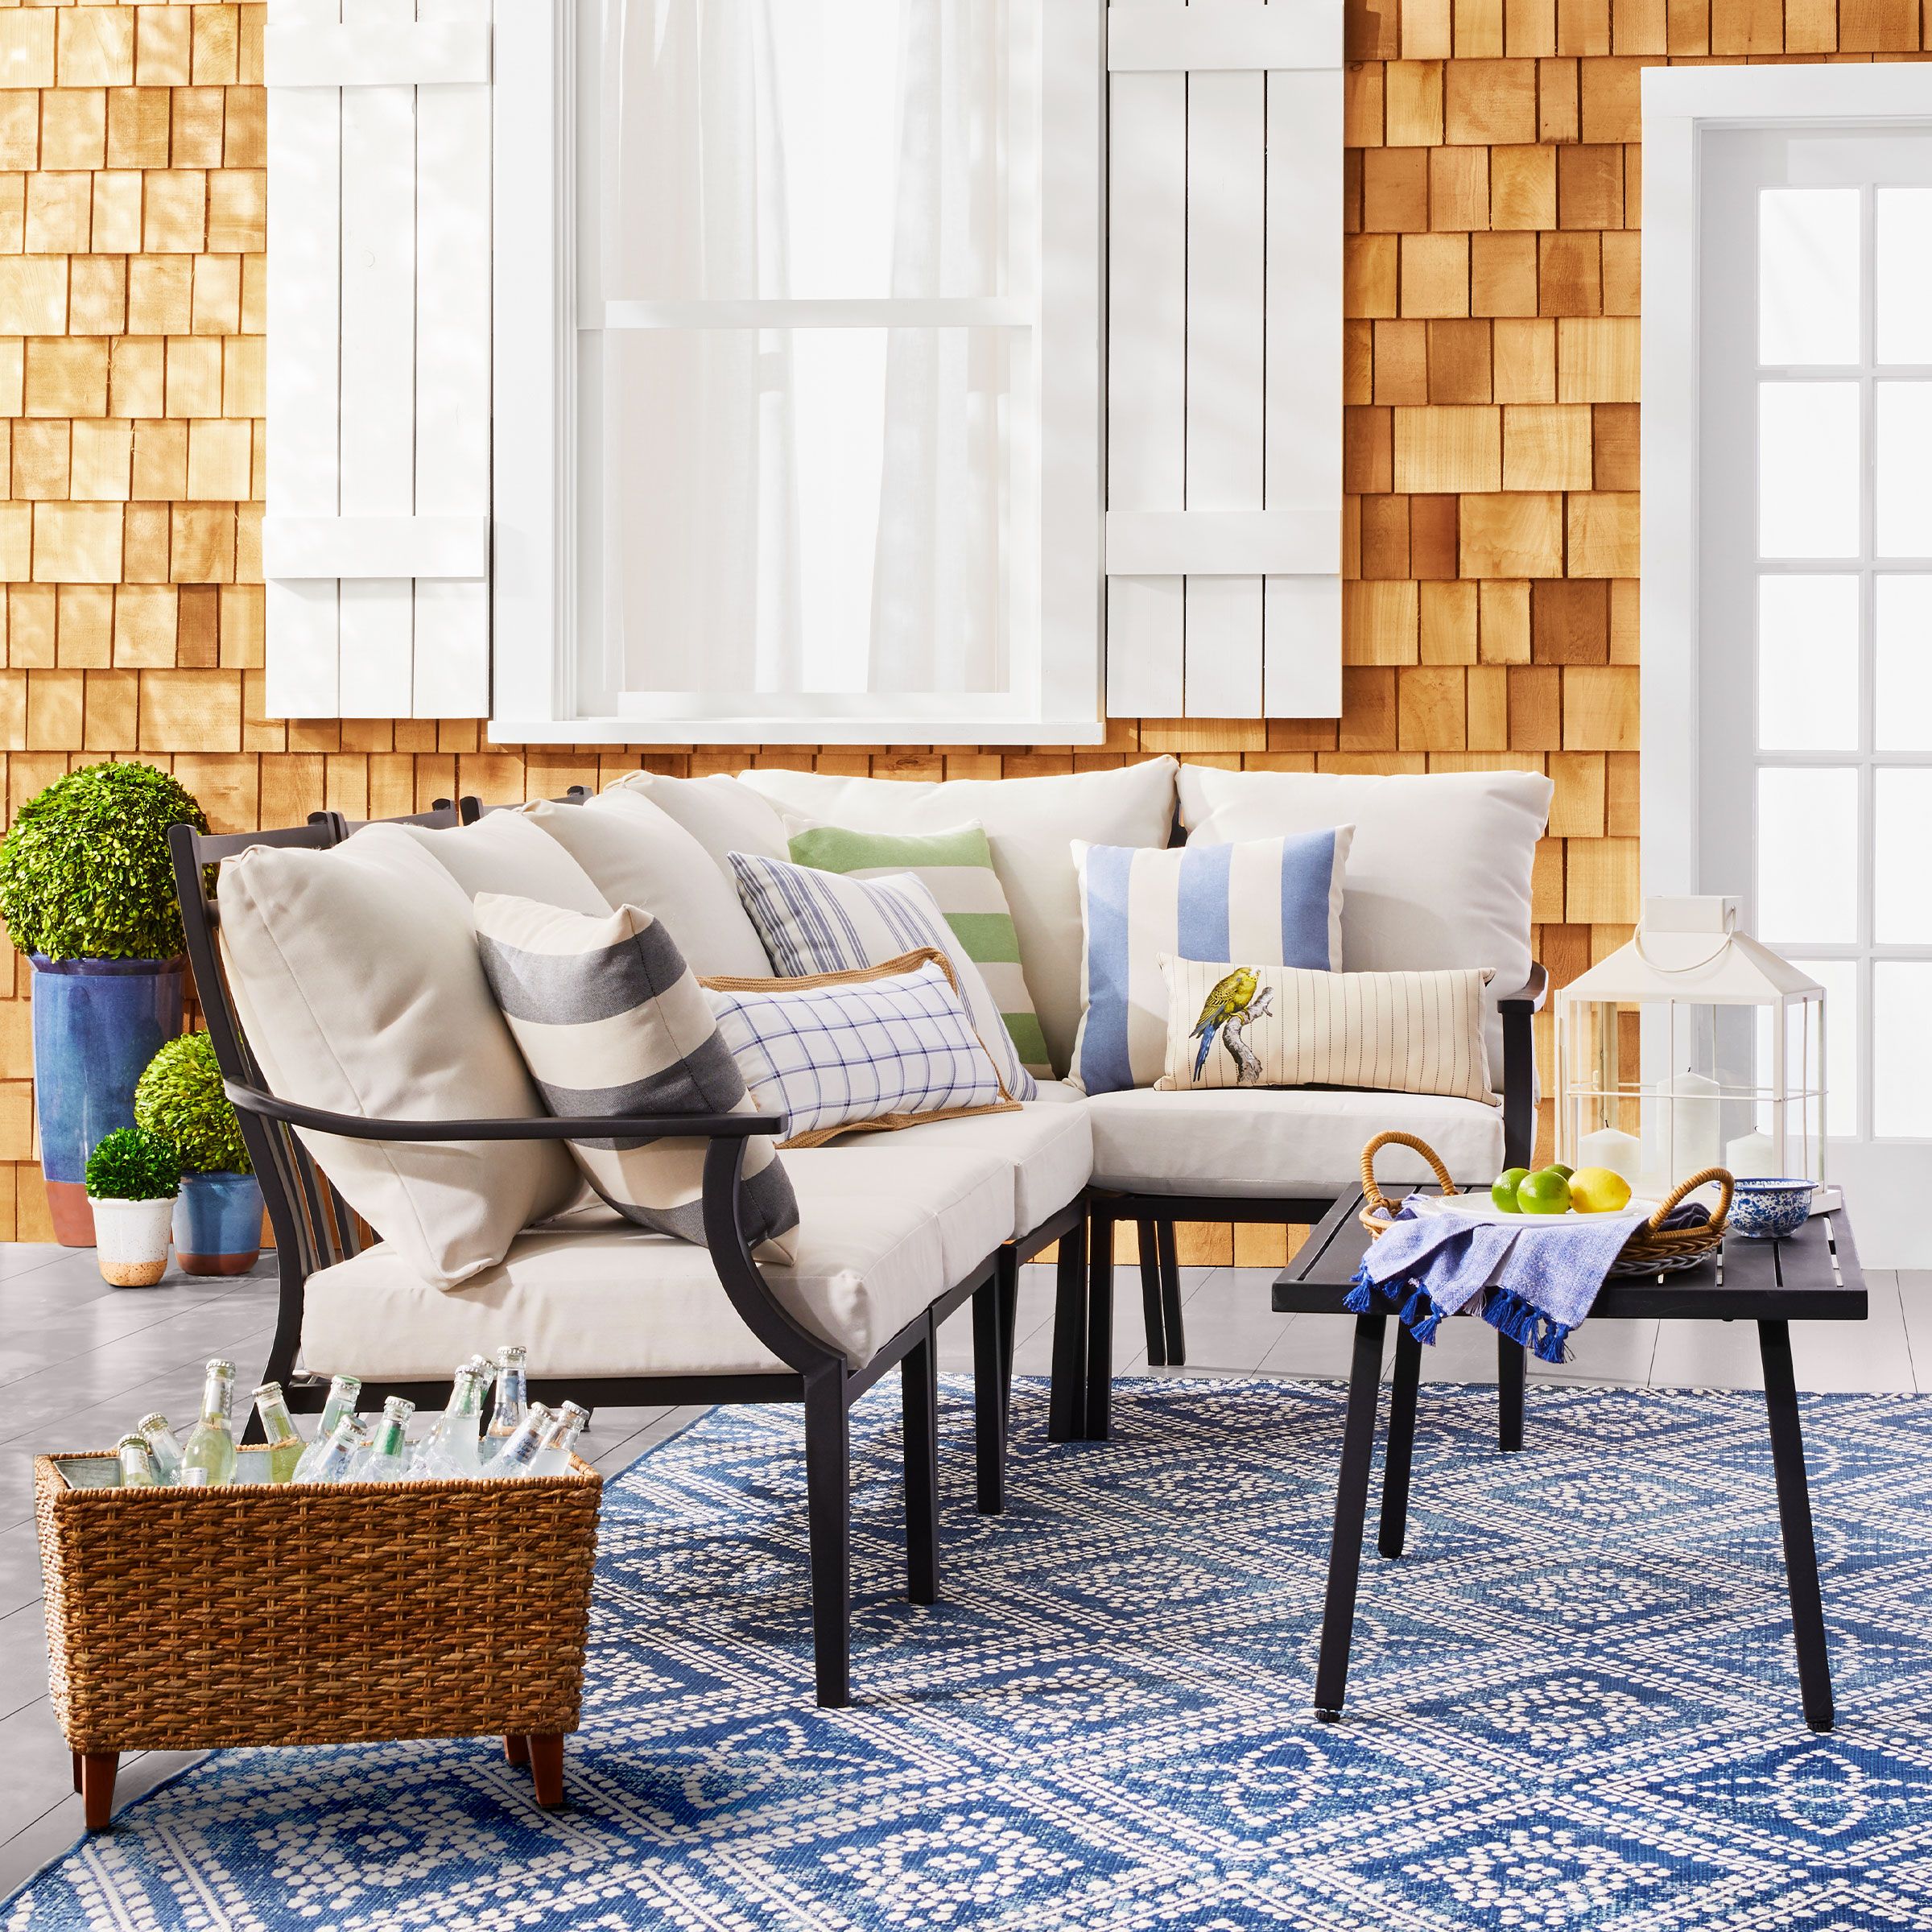 Target S 2019 Spring Home Collection Is Worth A Look